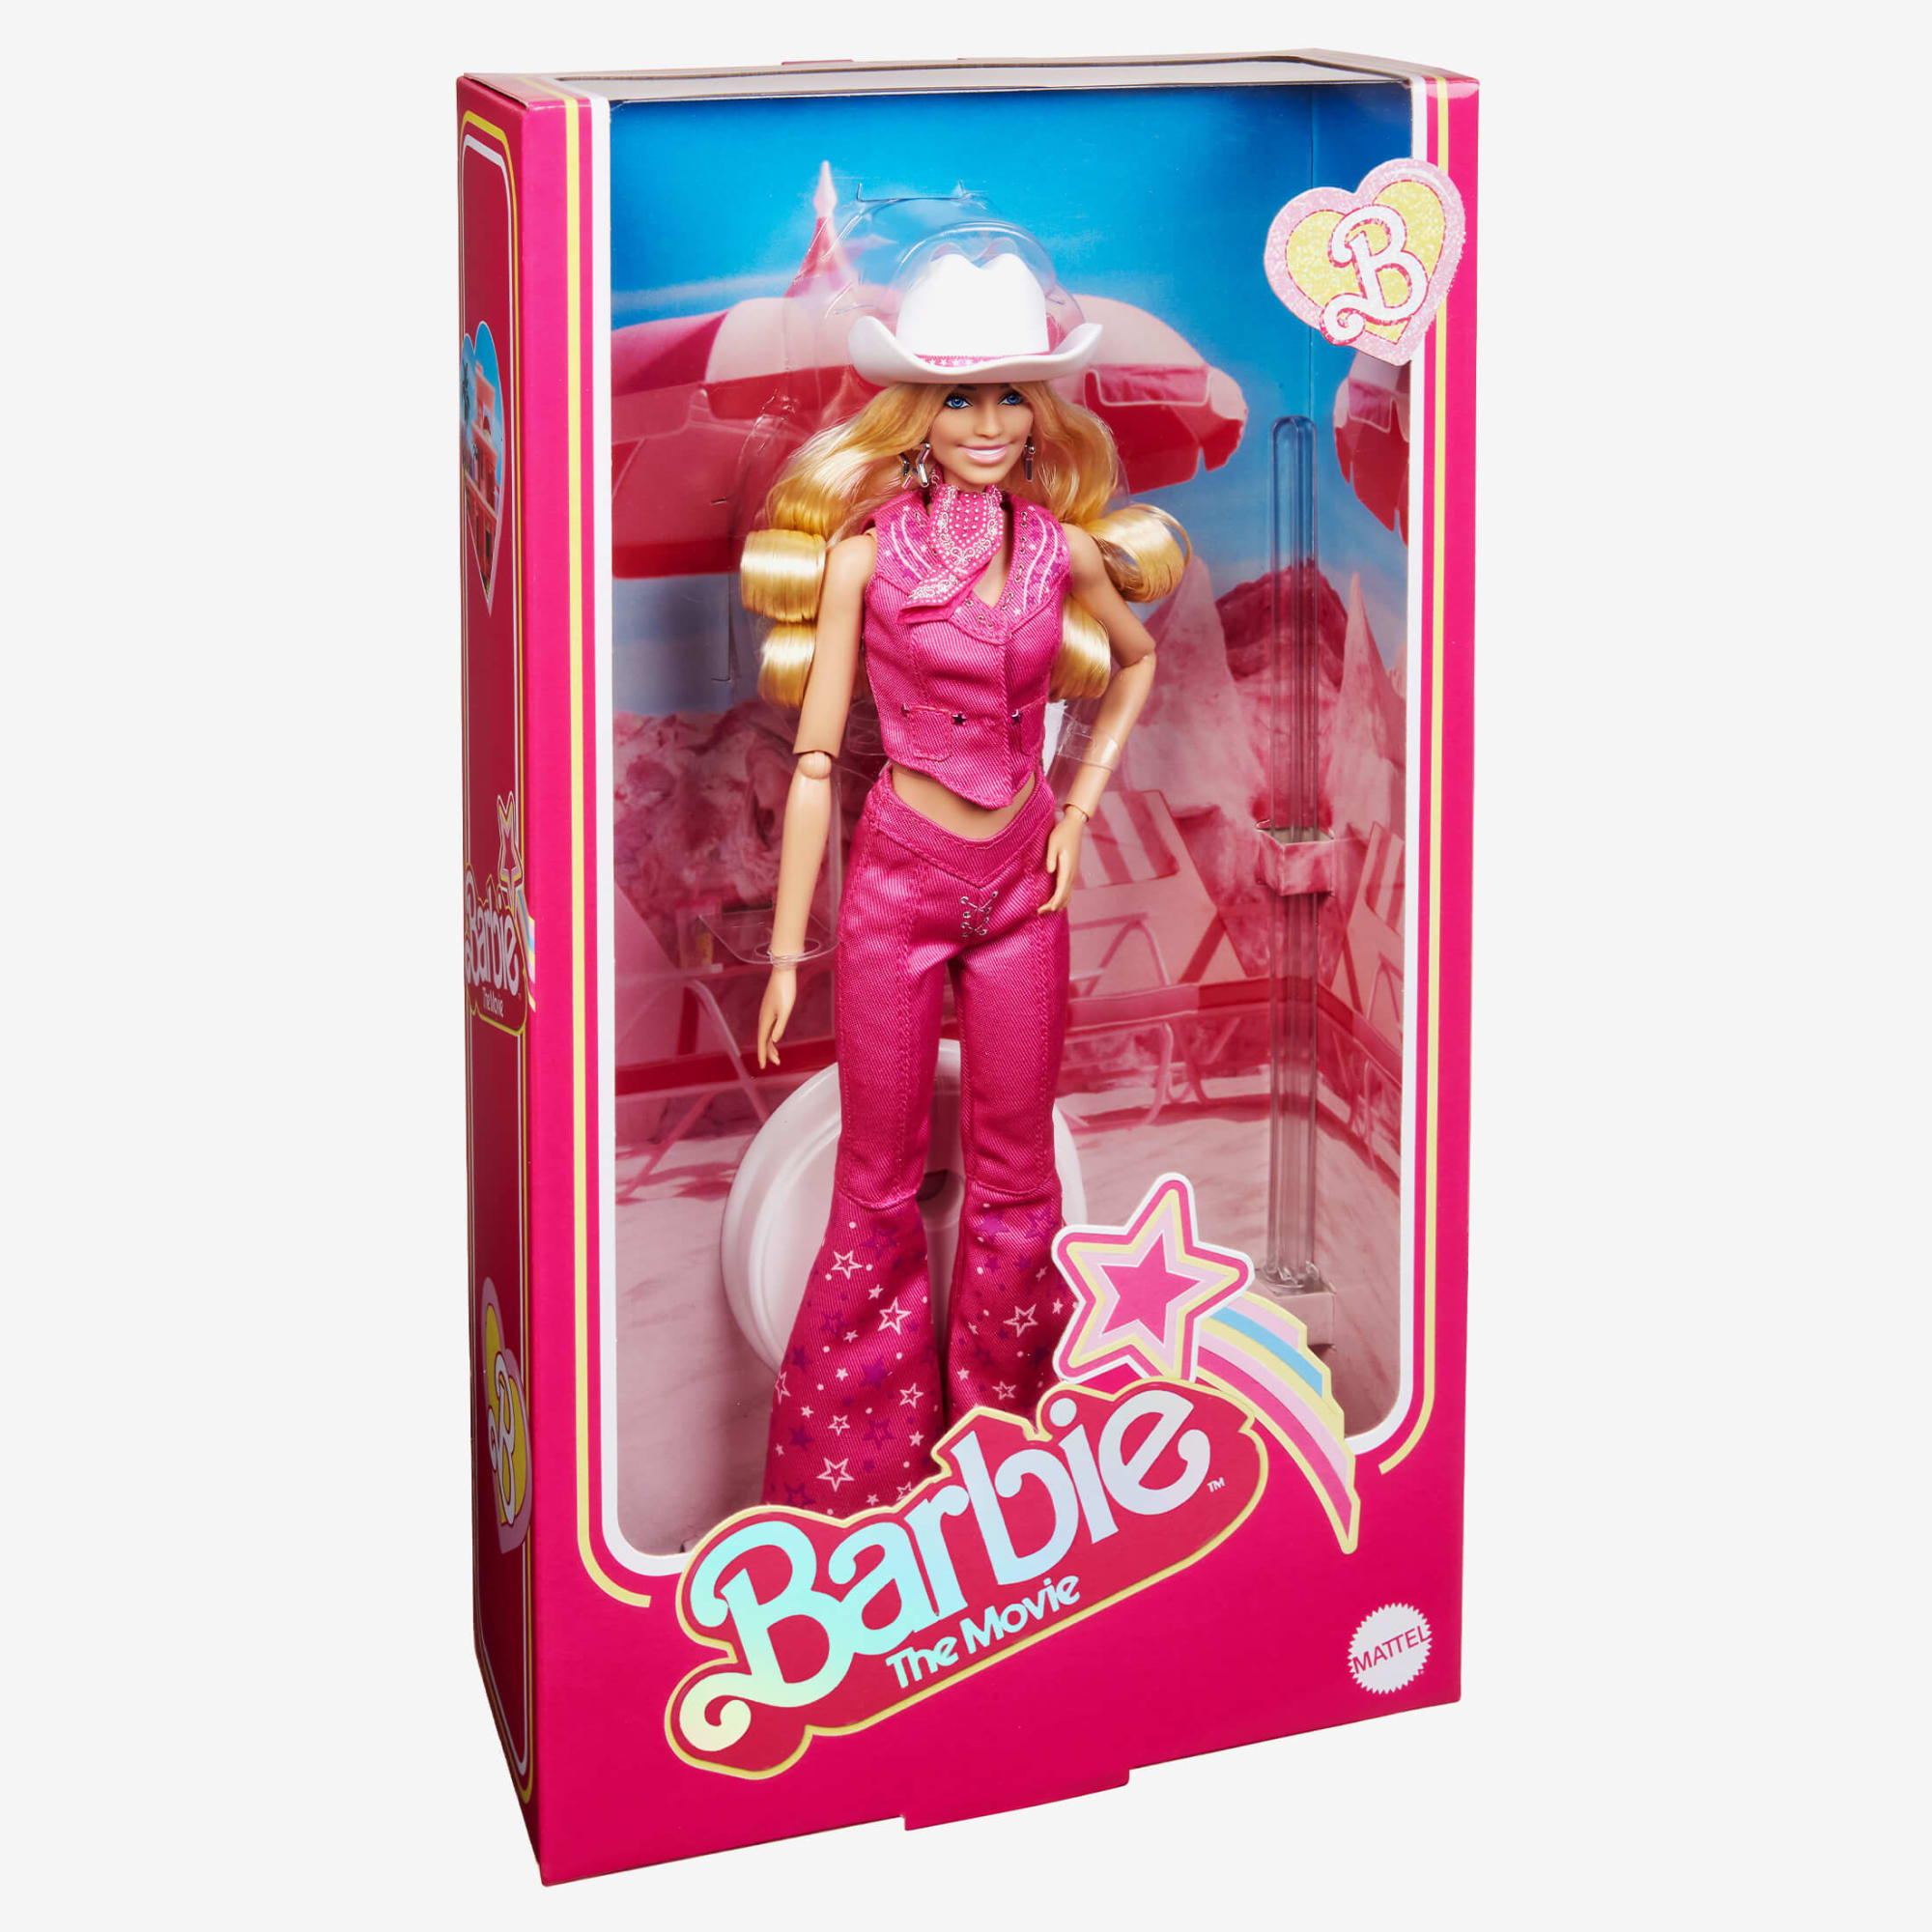 Barbie The MOVIE Western Outfit - 75 € between SIMPLICITY and ERRORS! We  are not!